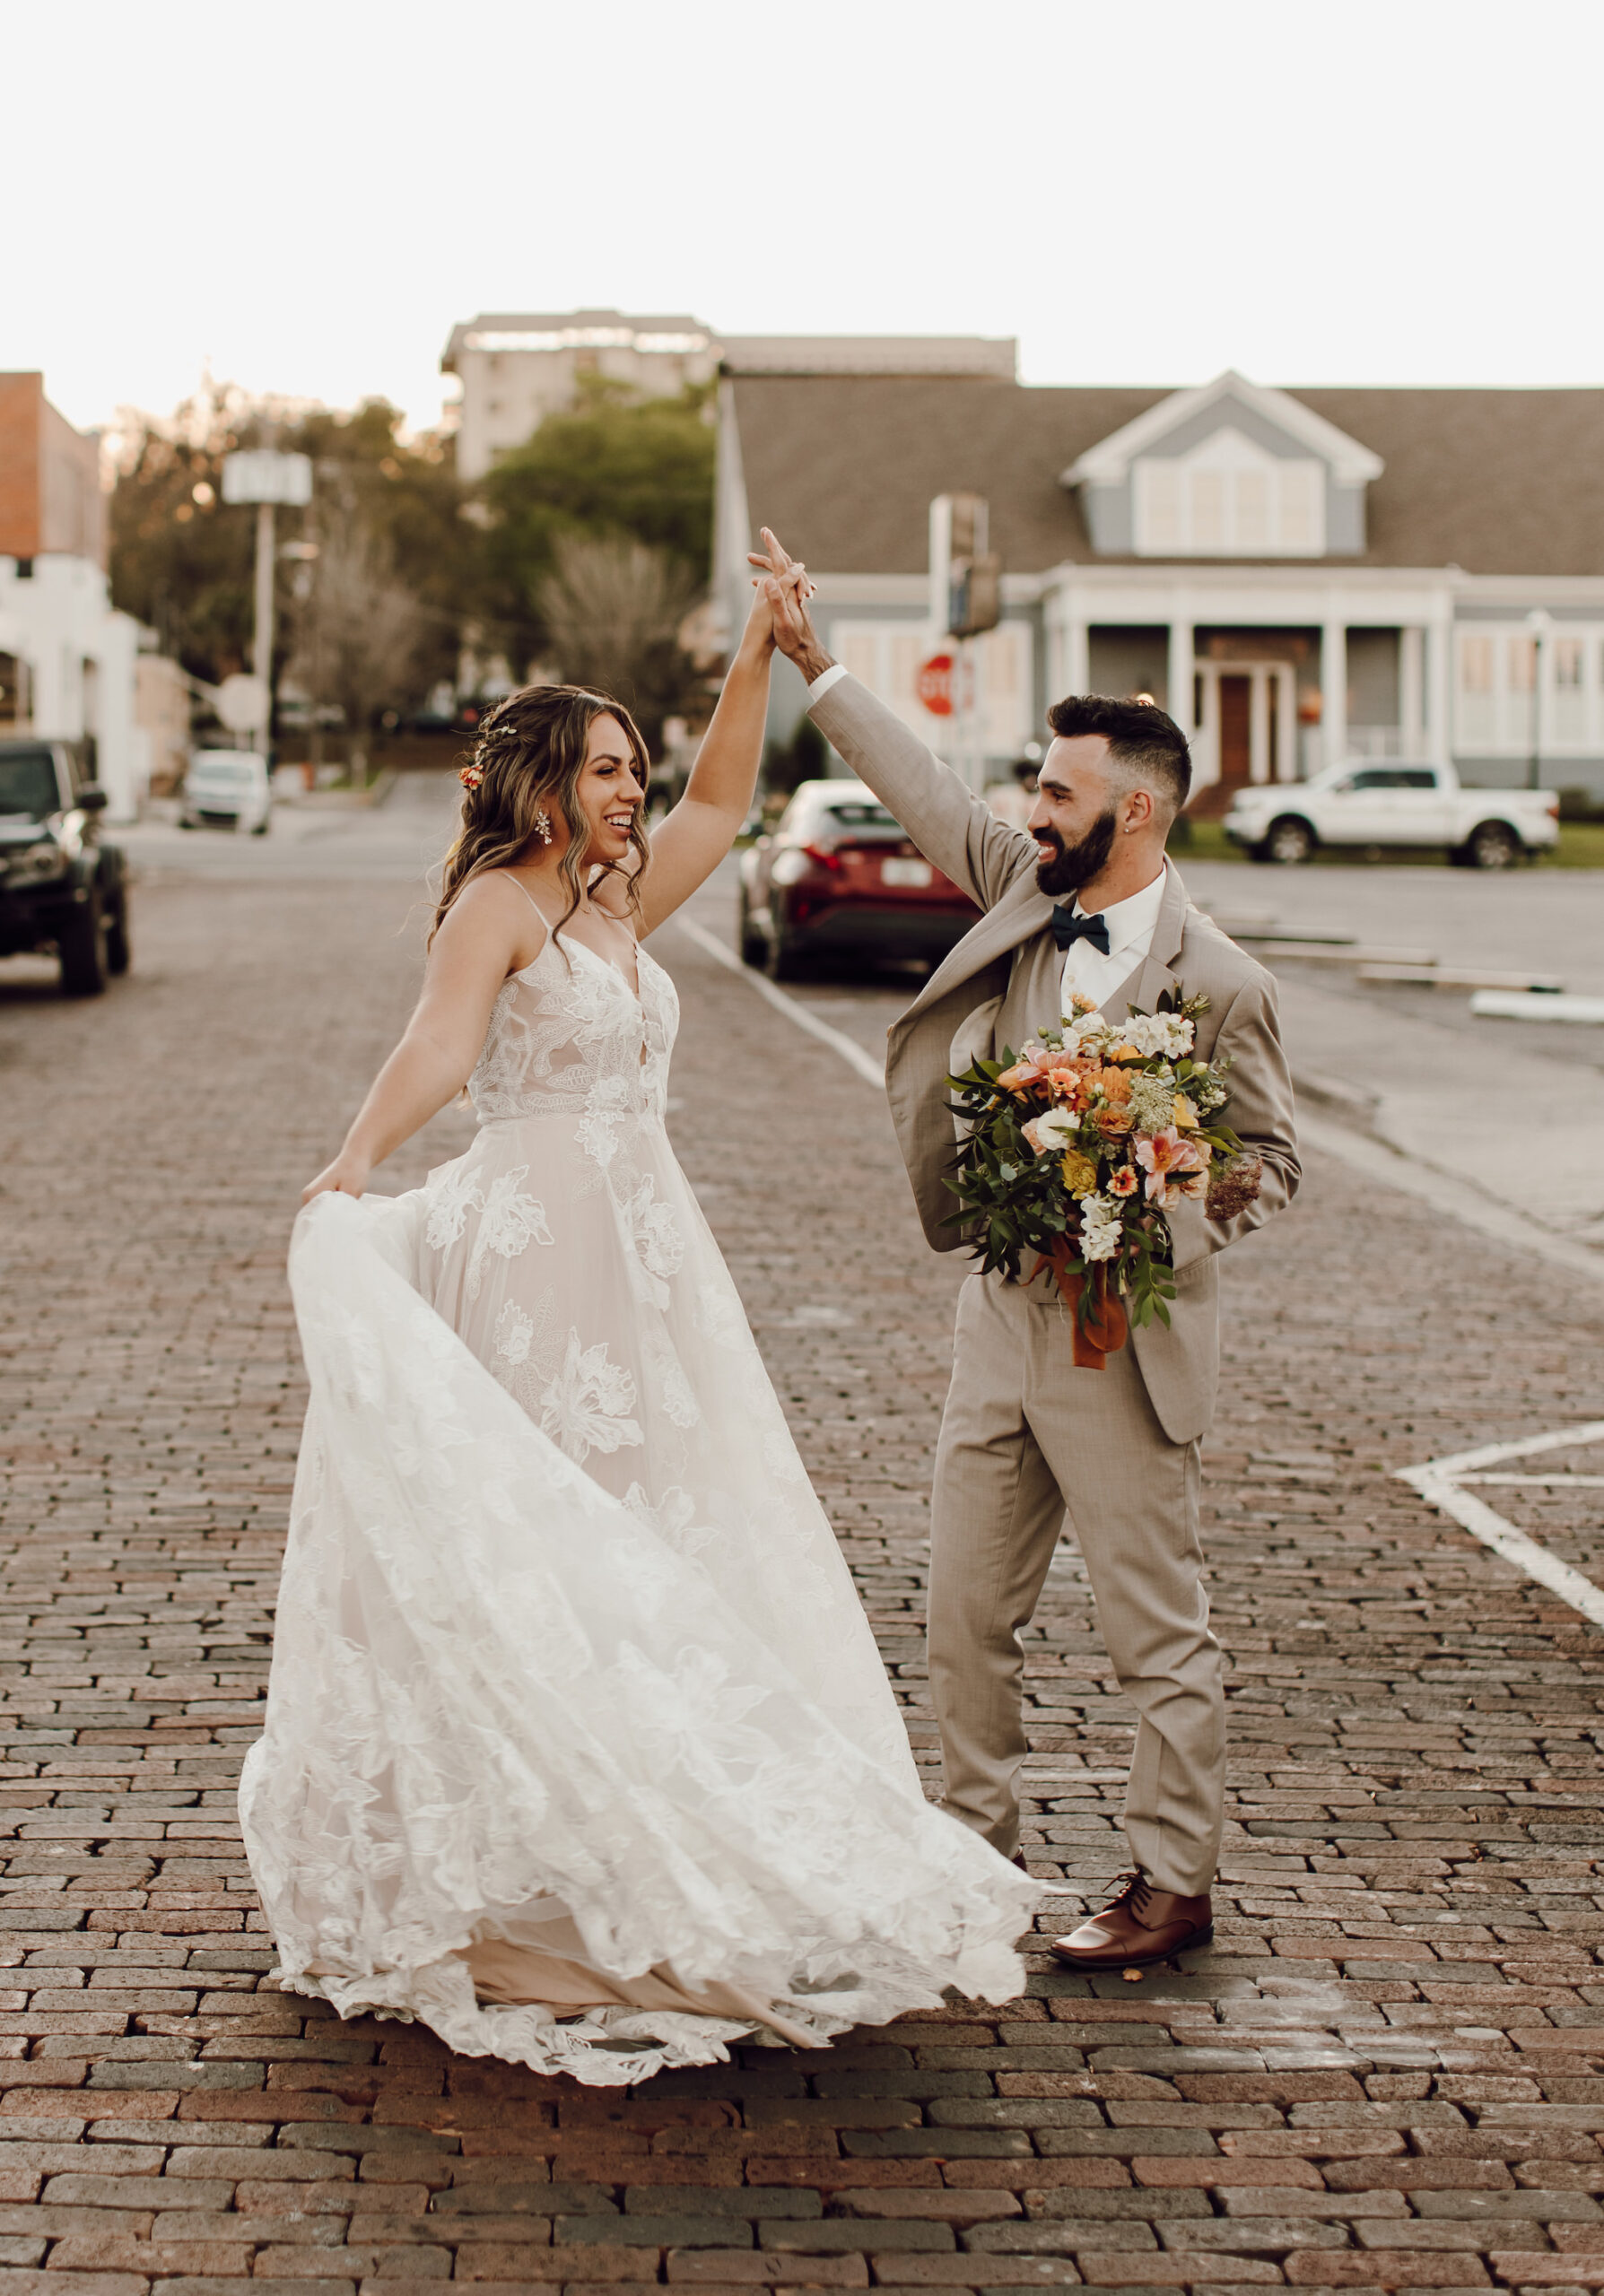 Bride and Groom Dancing in the Street Wedding Portrait | Dade City Venue at the Block